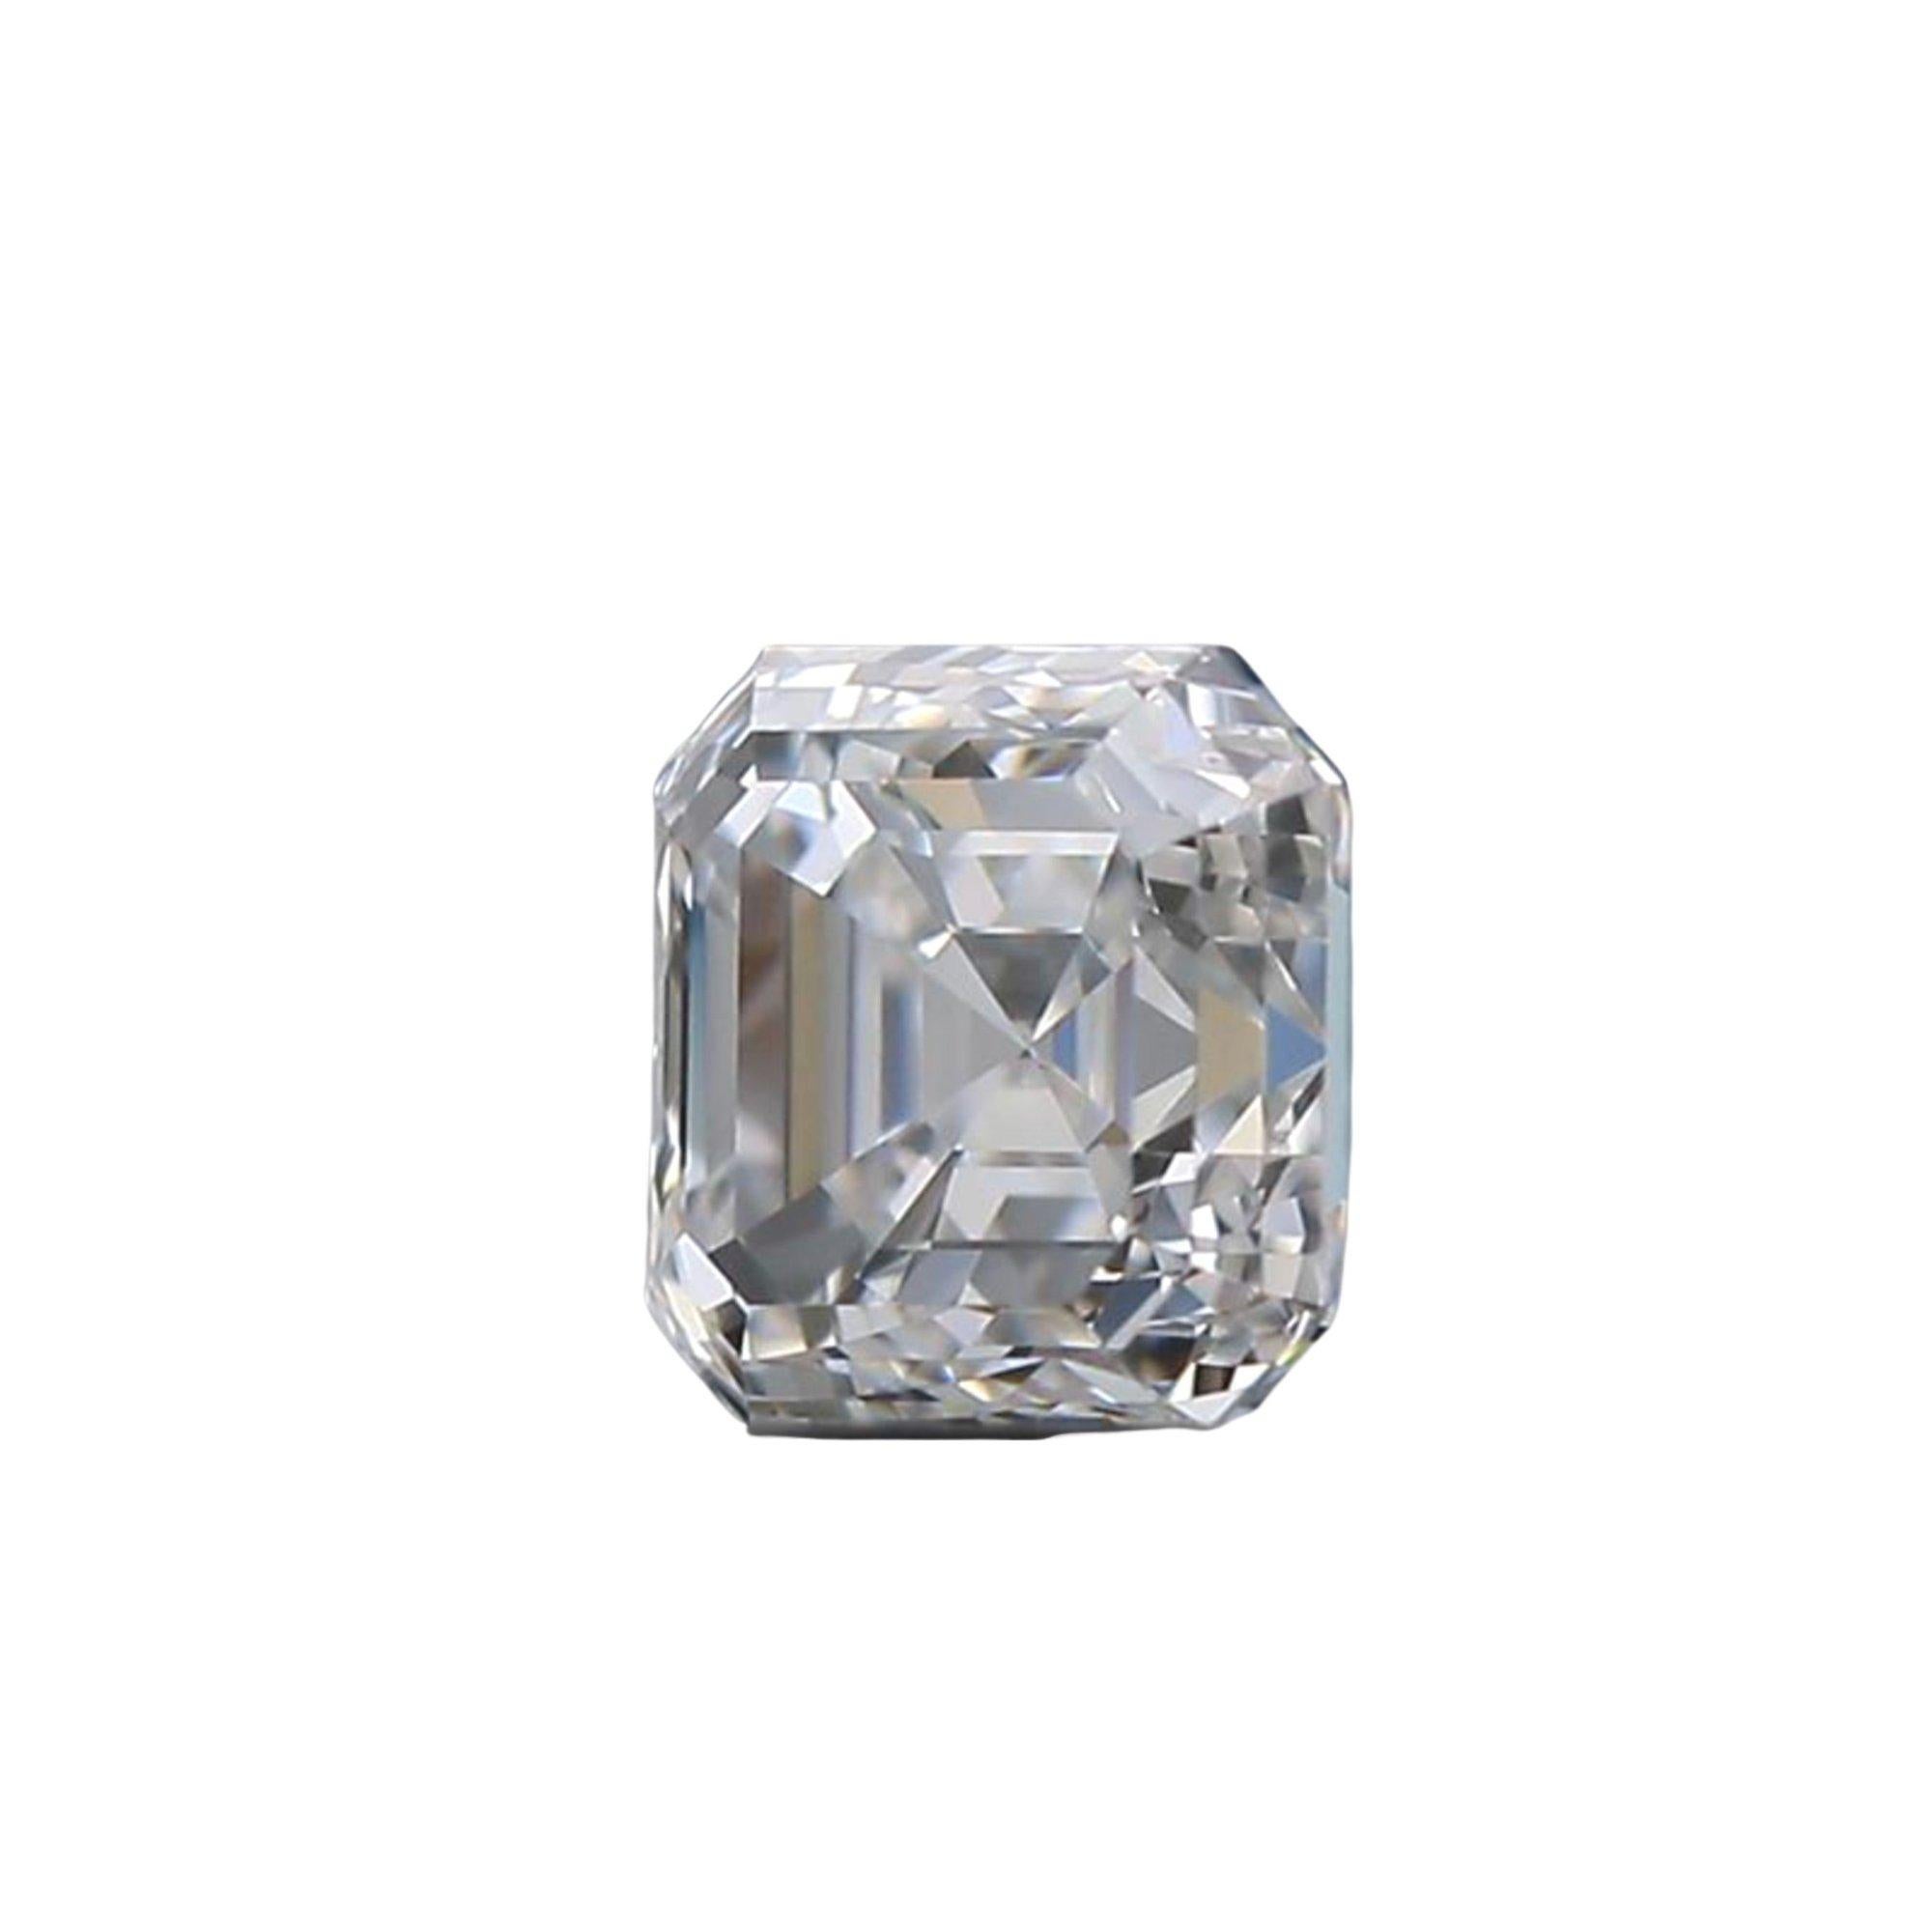 Ideal and beutiful Natural pair of Asher cl diamond in a 1.85 carat total weight with D VVS1 grading from GIA labratory with certificate and laser inscription number.

GIA report no. 6395331986

Sku: P-344-mrk245
